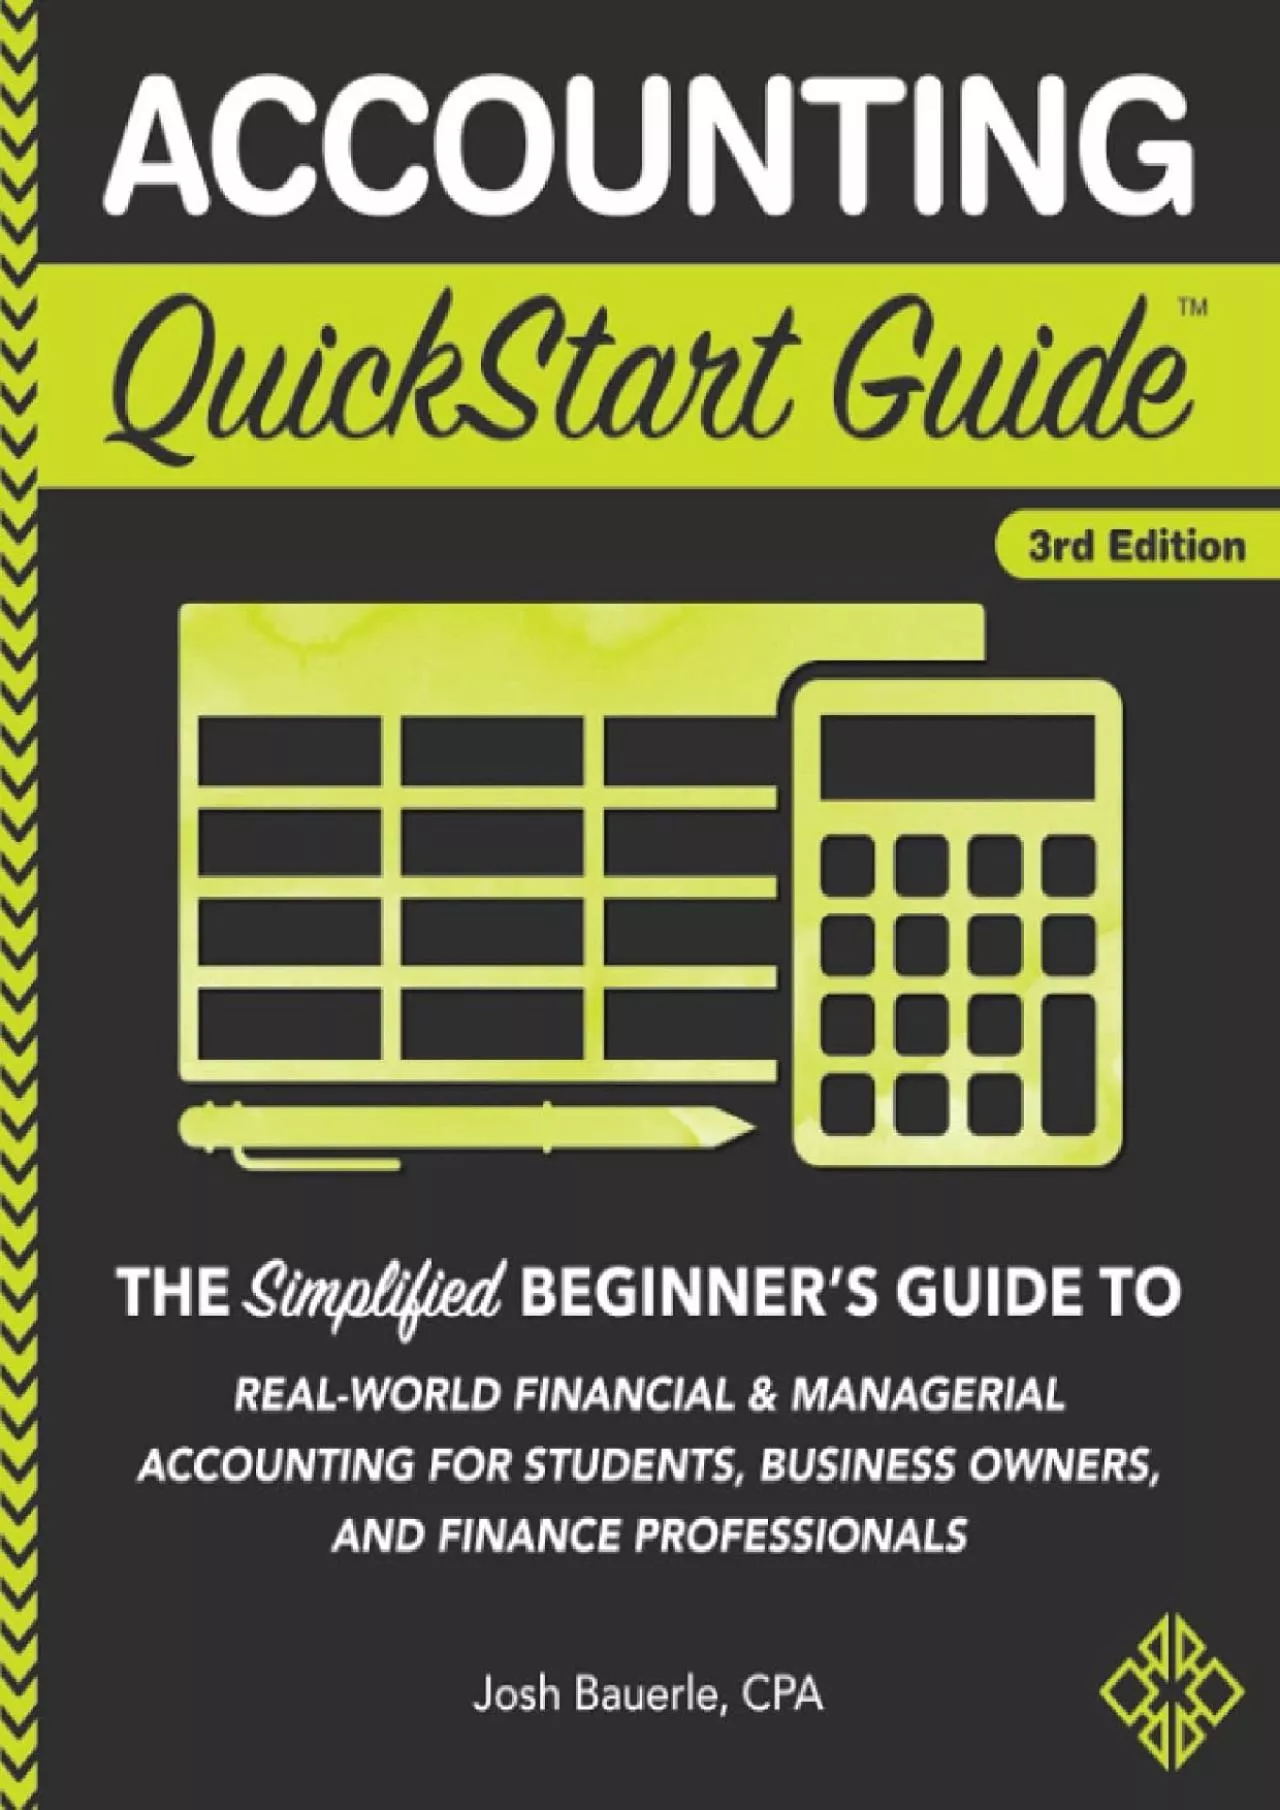 (BOOS)-Accounting QuickStart Guide: The Simplified Beginner\'s Guide to Financial & Managerial